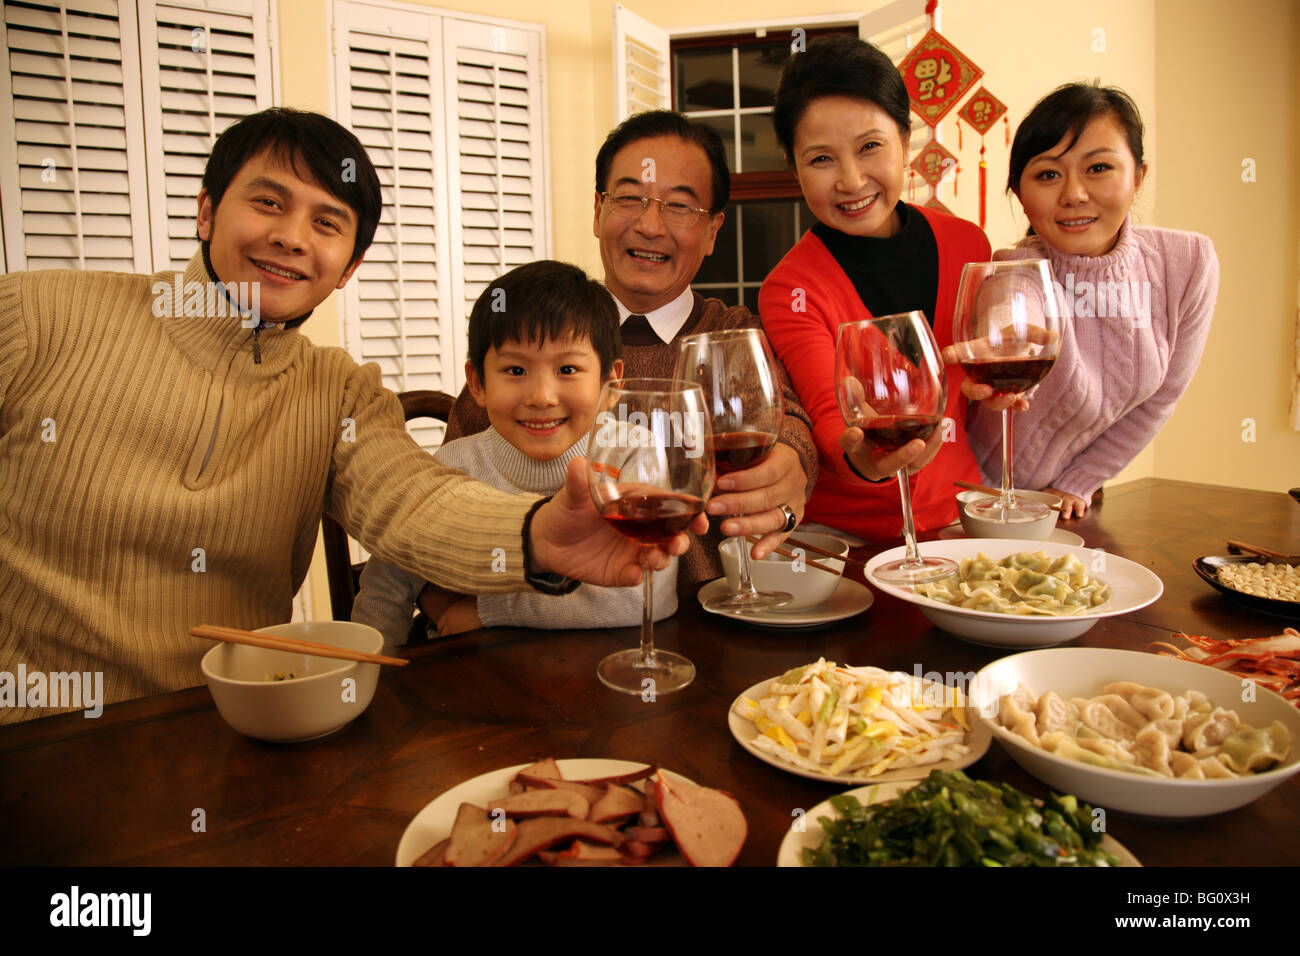 Chinese New Year Family Dinner High Resolution Stock Photography and